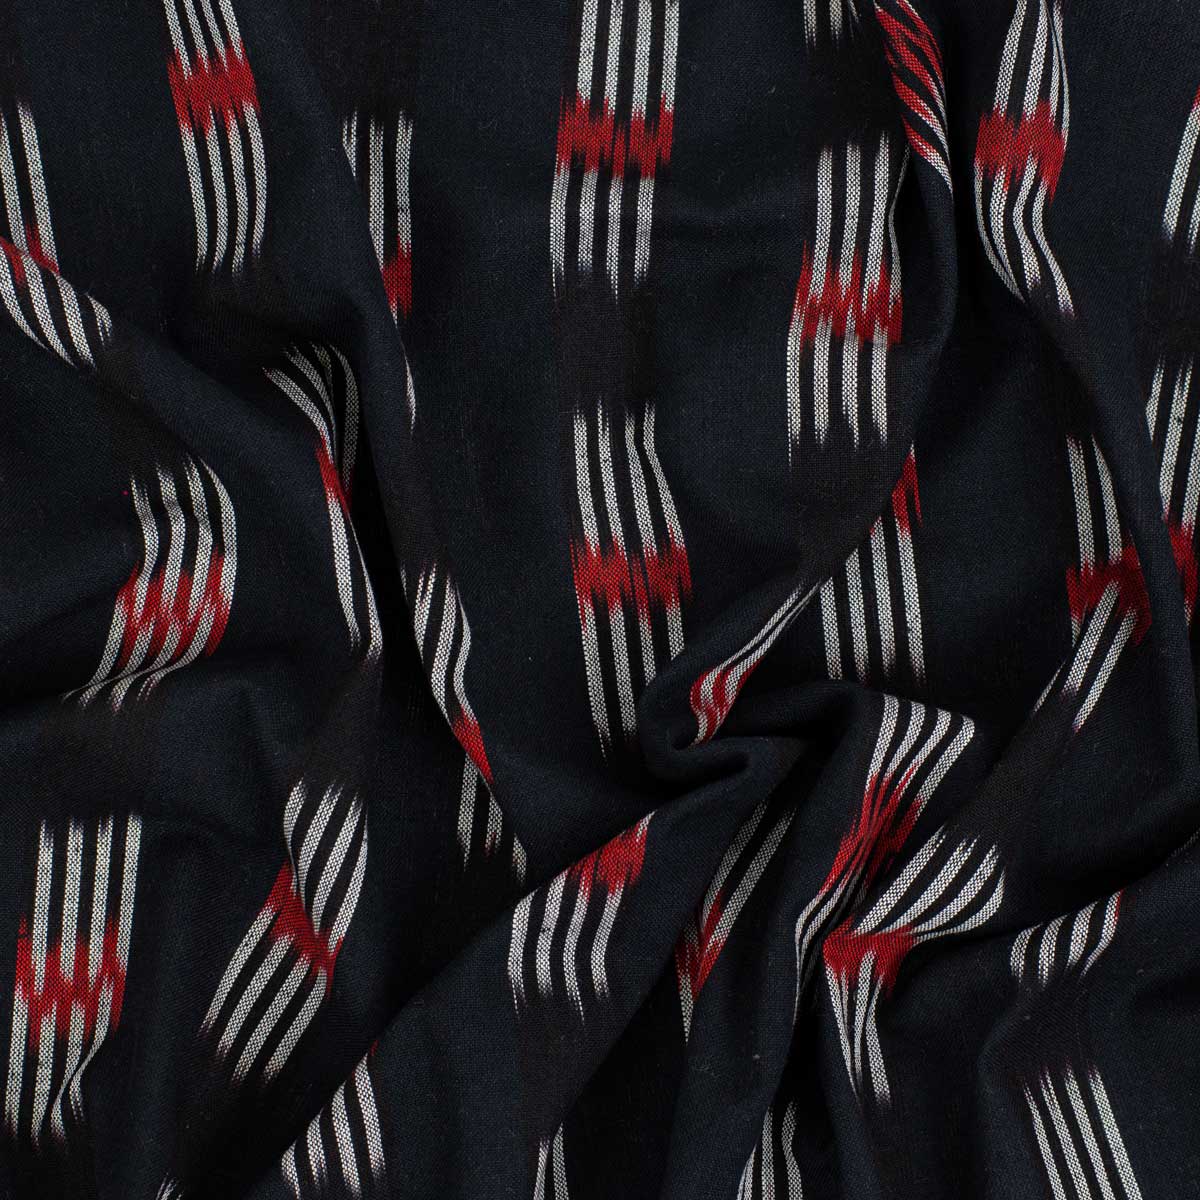 IKAT RED SPOT Fabric, black/red/white